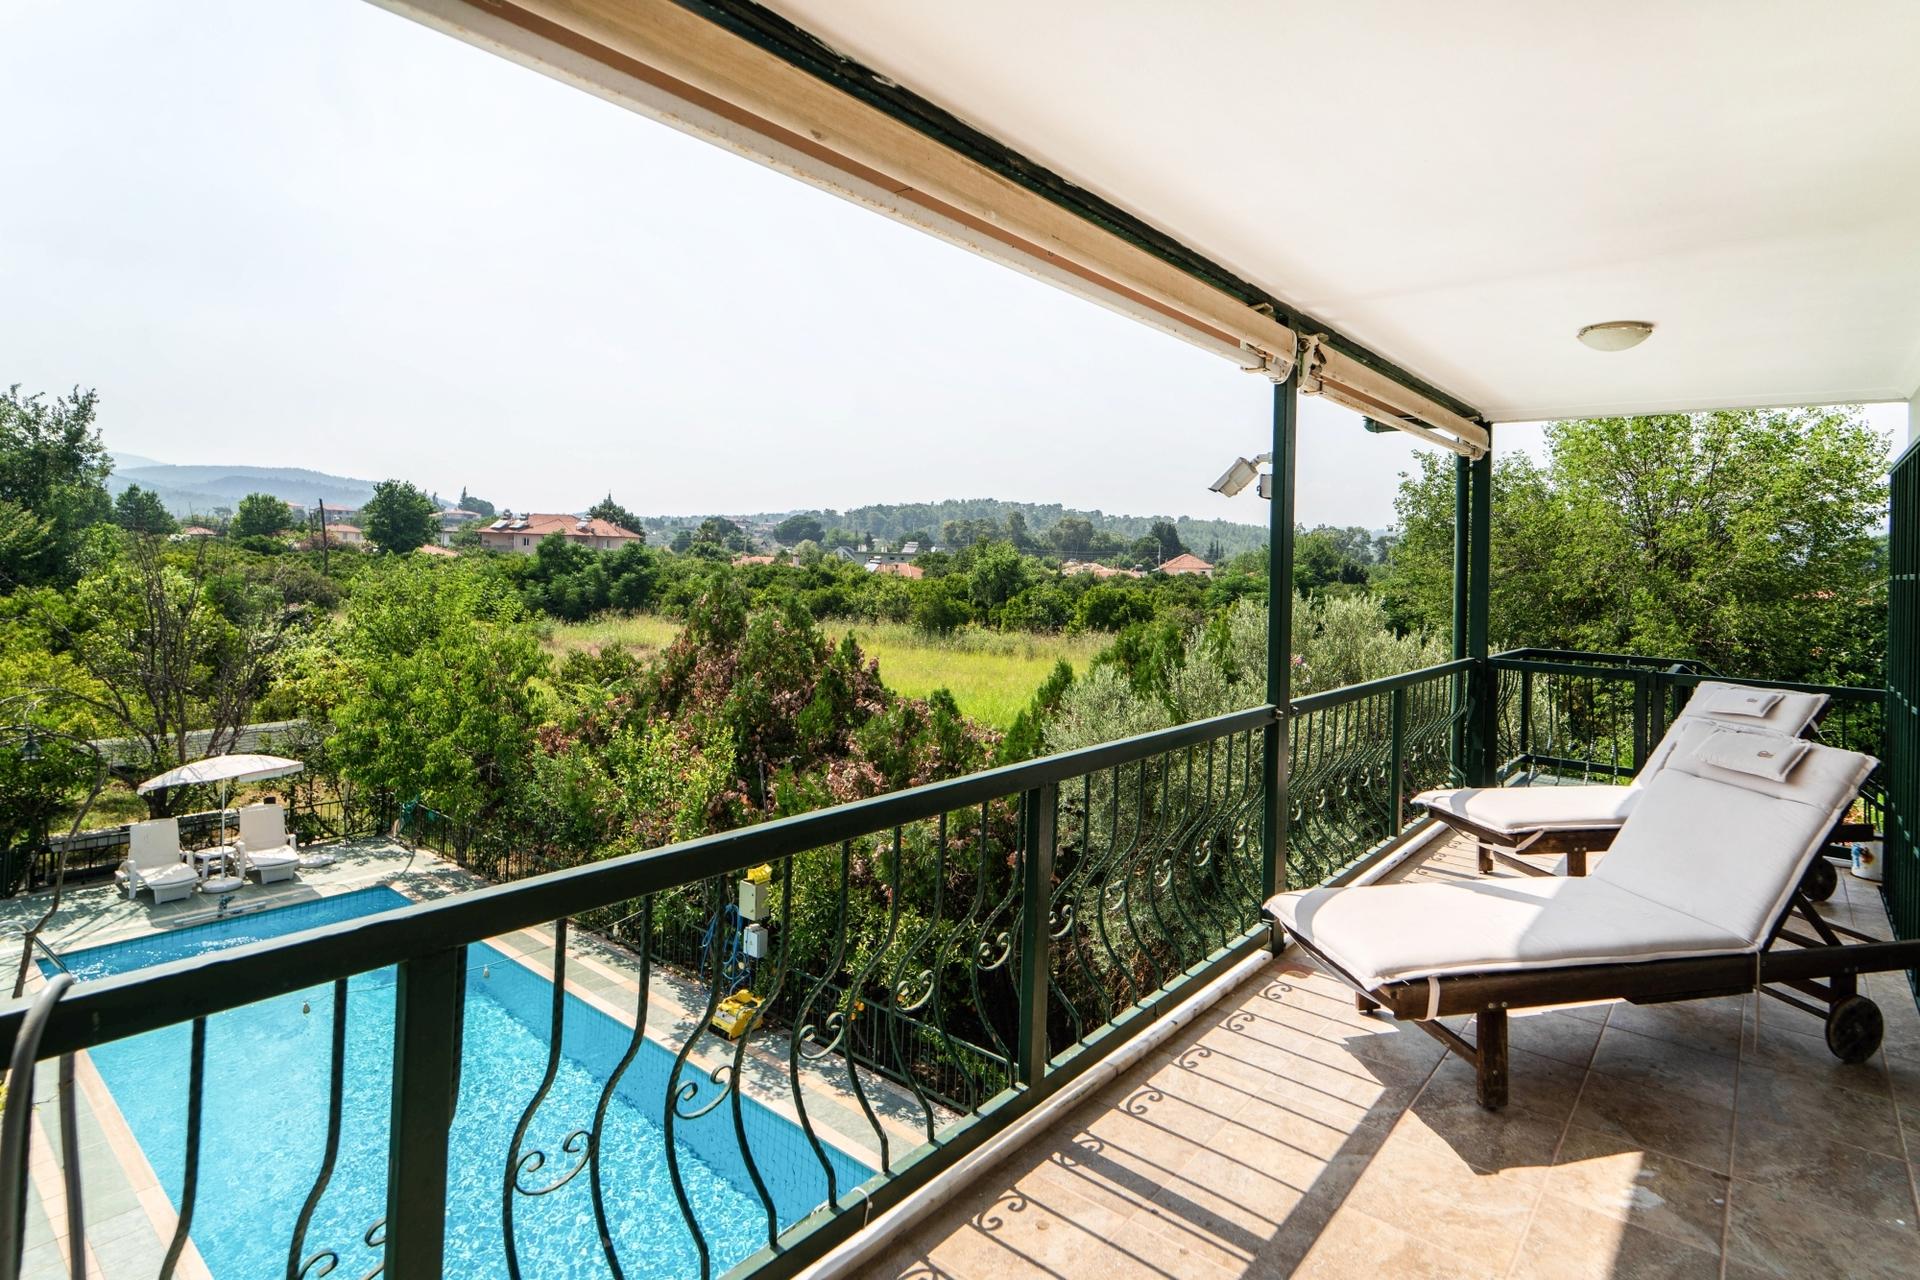 Witness the splendor of the surrounding nature with panoramic views from your private balcony.